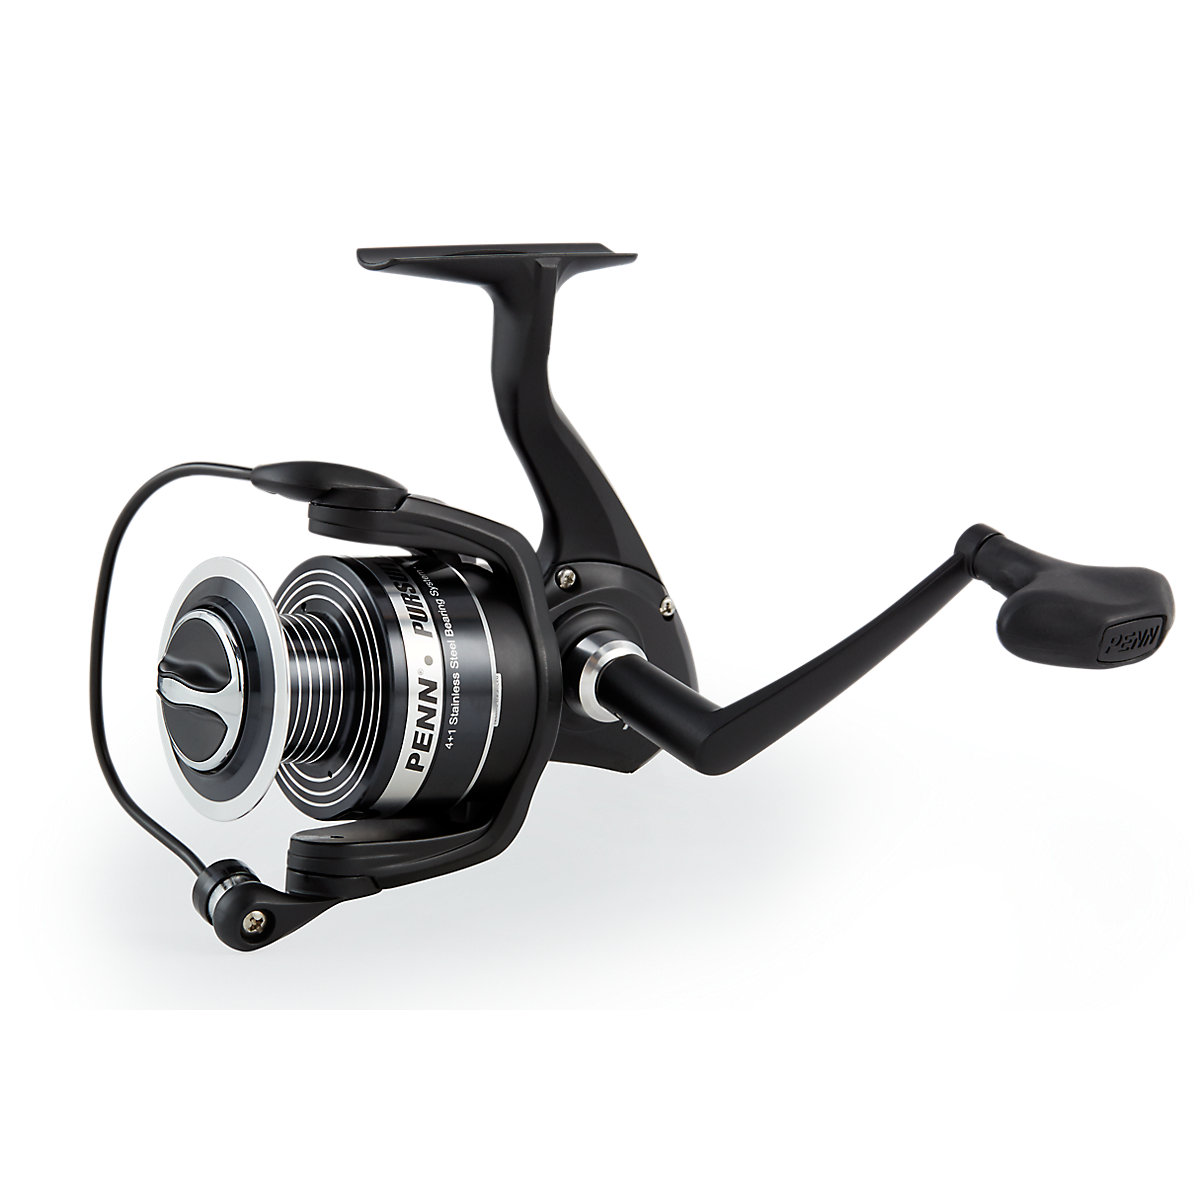 Penn Pursuit II Spin Reel 4000 Boxed 1292958 - image 5 of 6